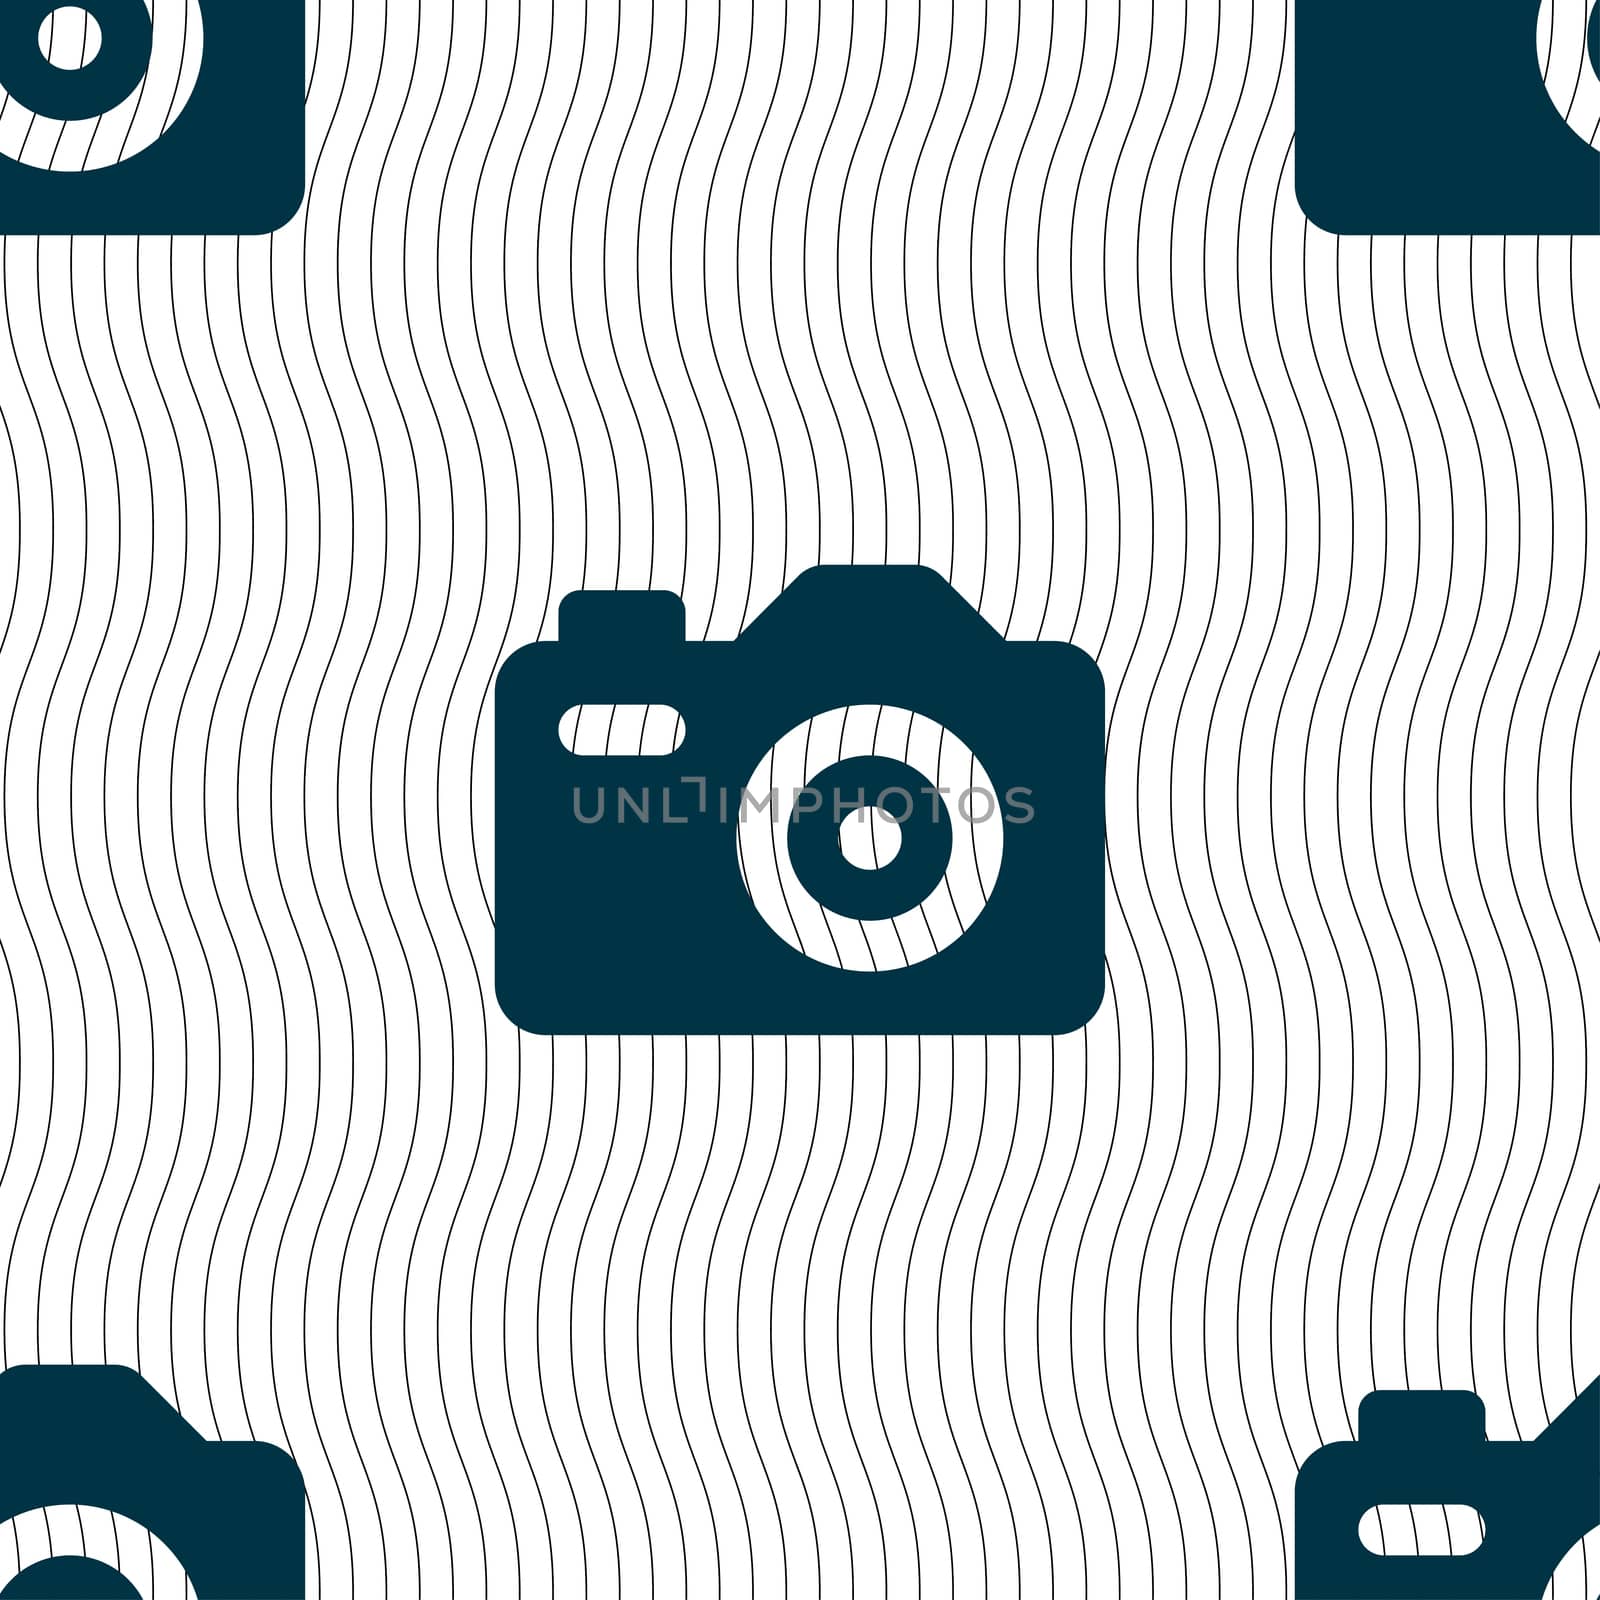 Photo Camera icon sign. Seamless pattern with geometric texture. Vector illustration